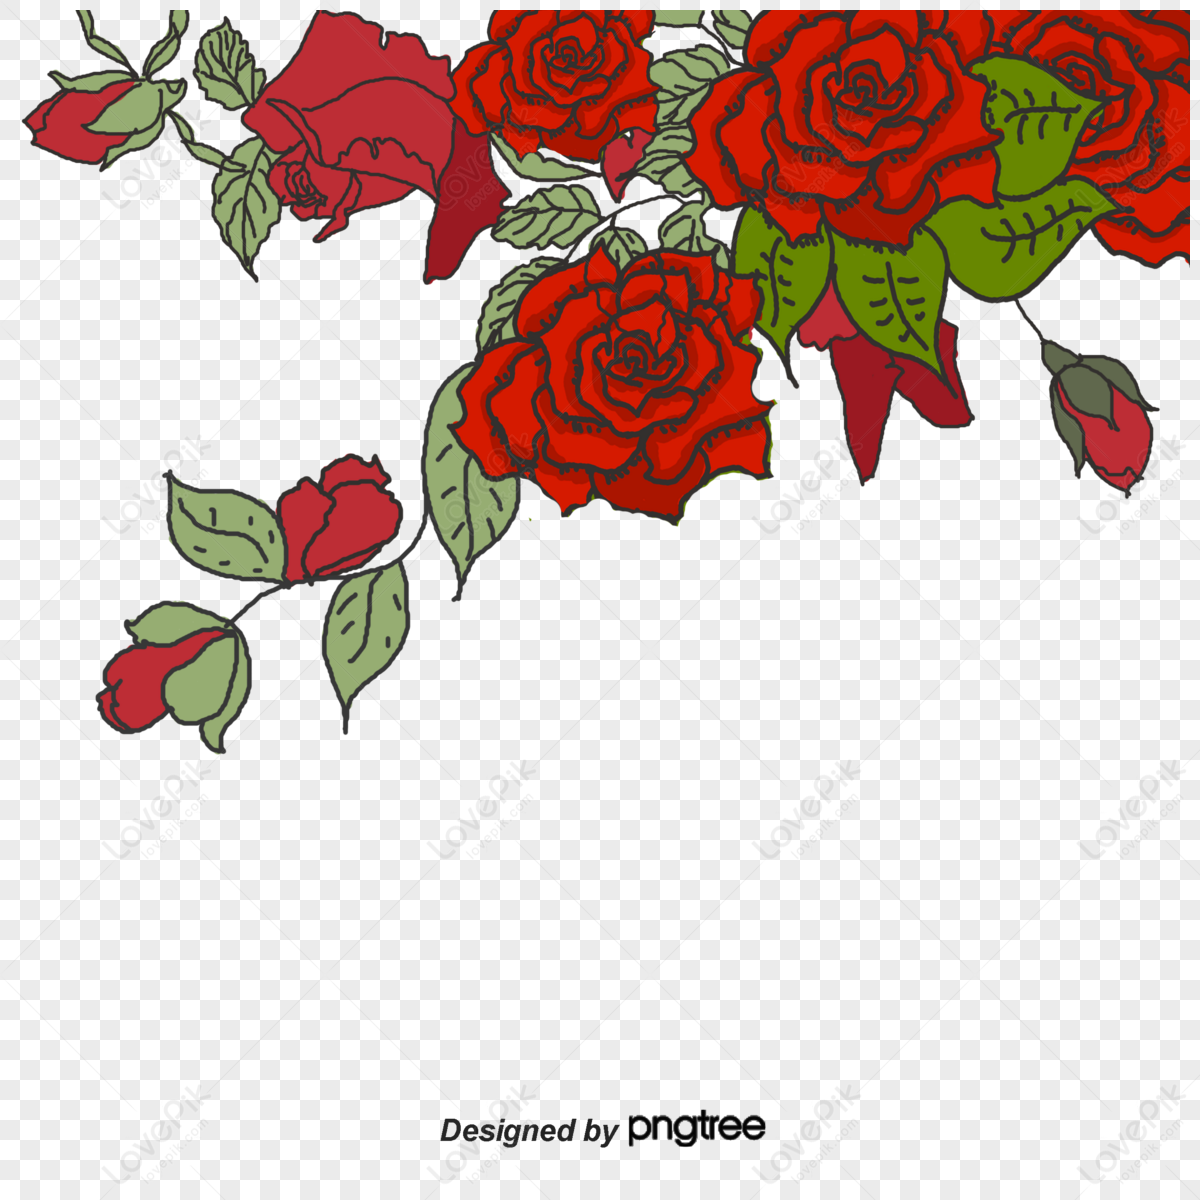 Red Rose Border Images Hd Pictures For